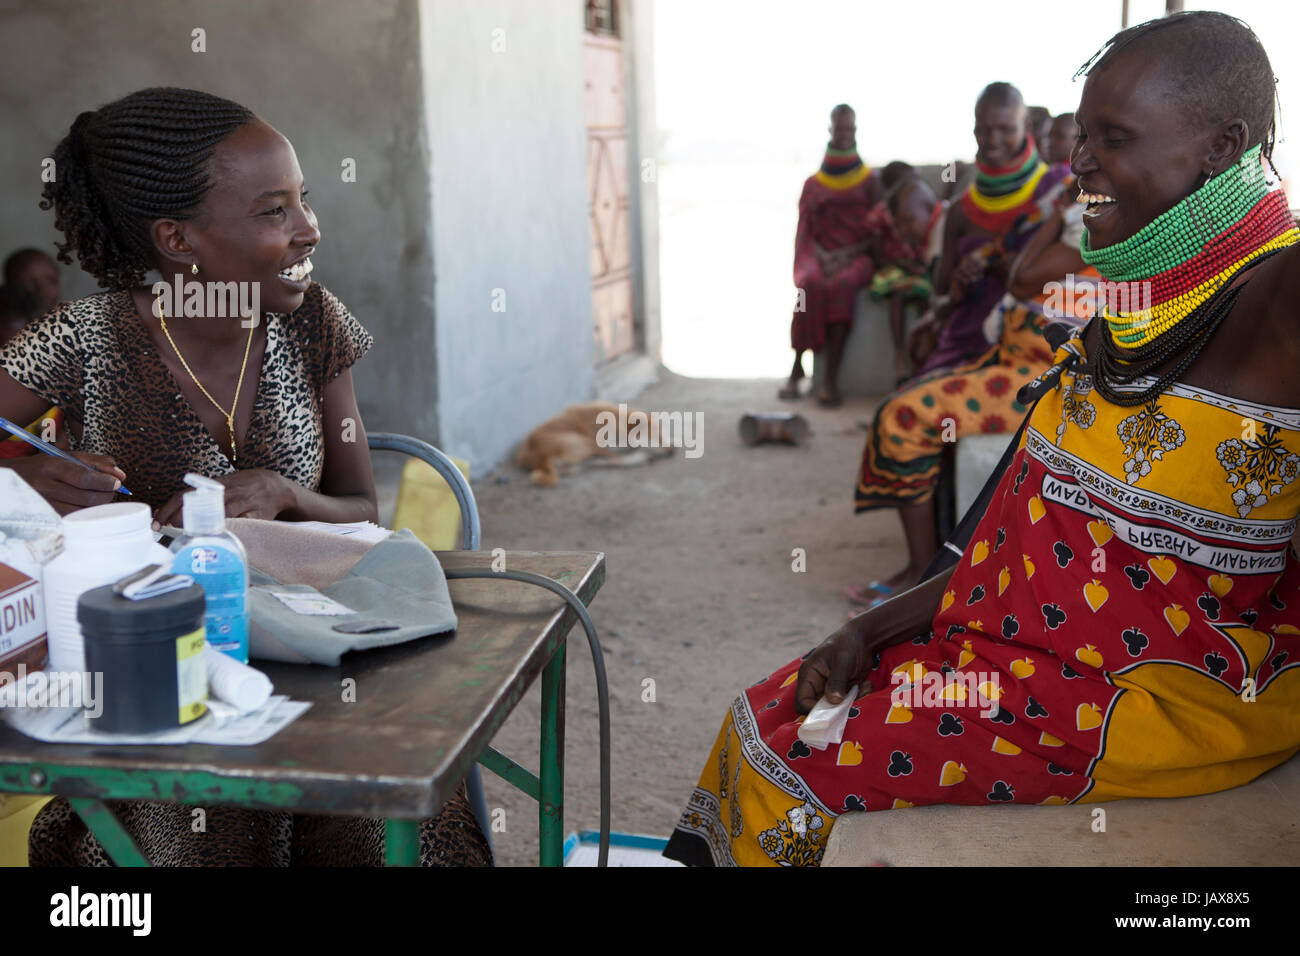 A woman attends a health clinic, rural Kenya, Africa. Stock Photo